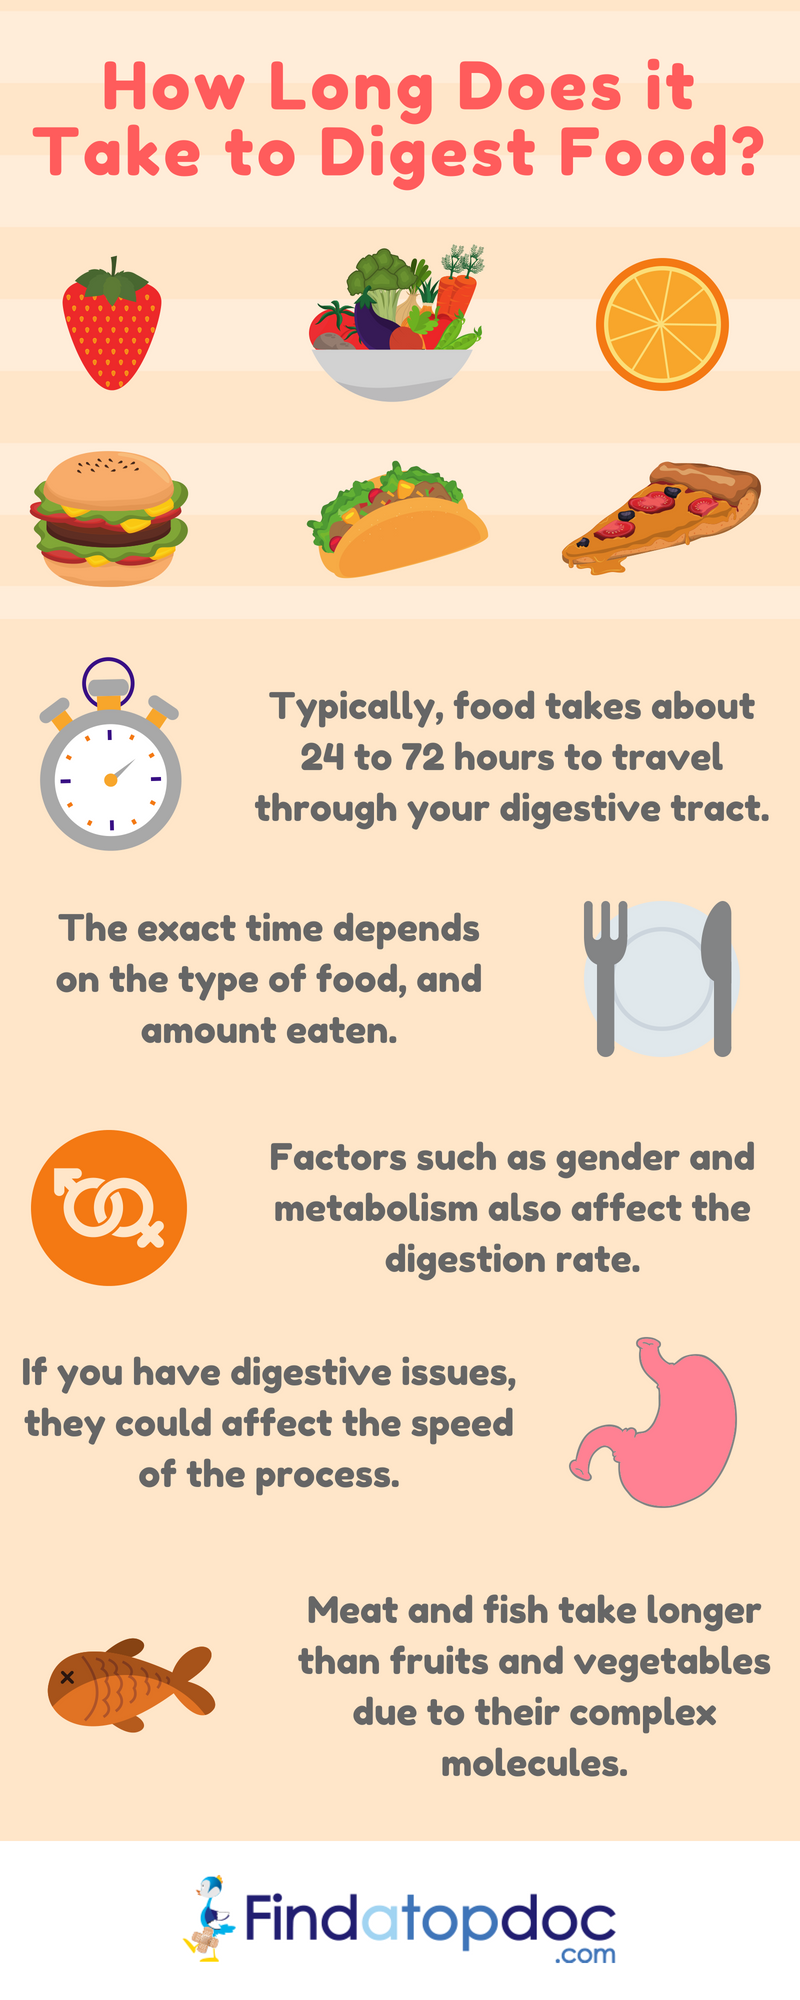 How Long Does It Take to Digest Food?